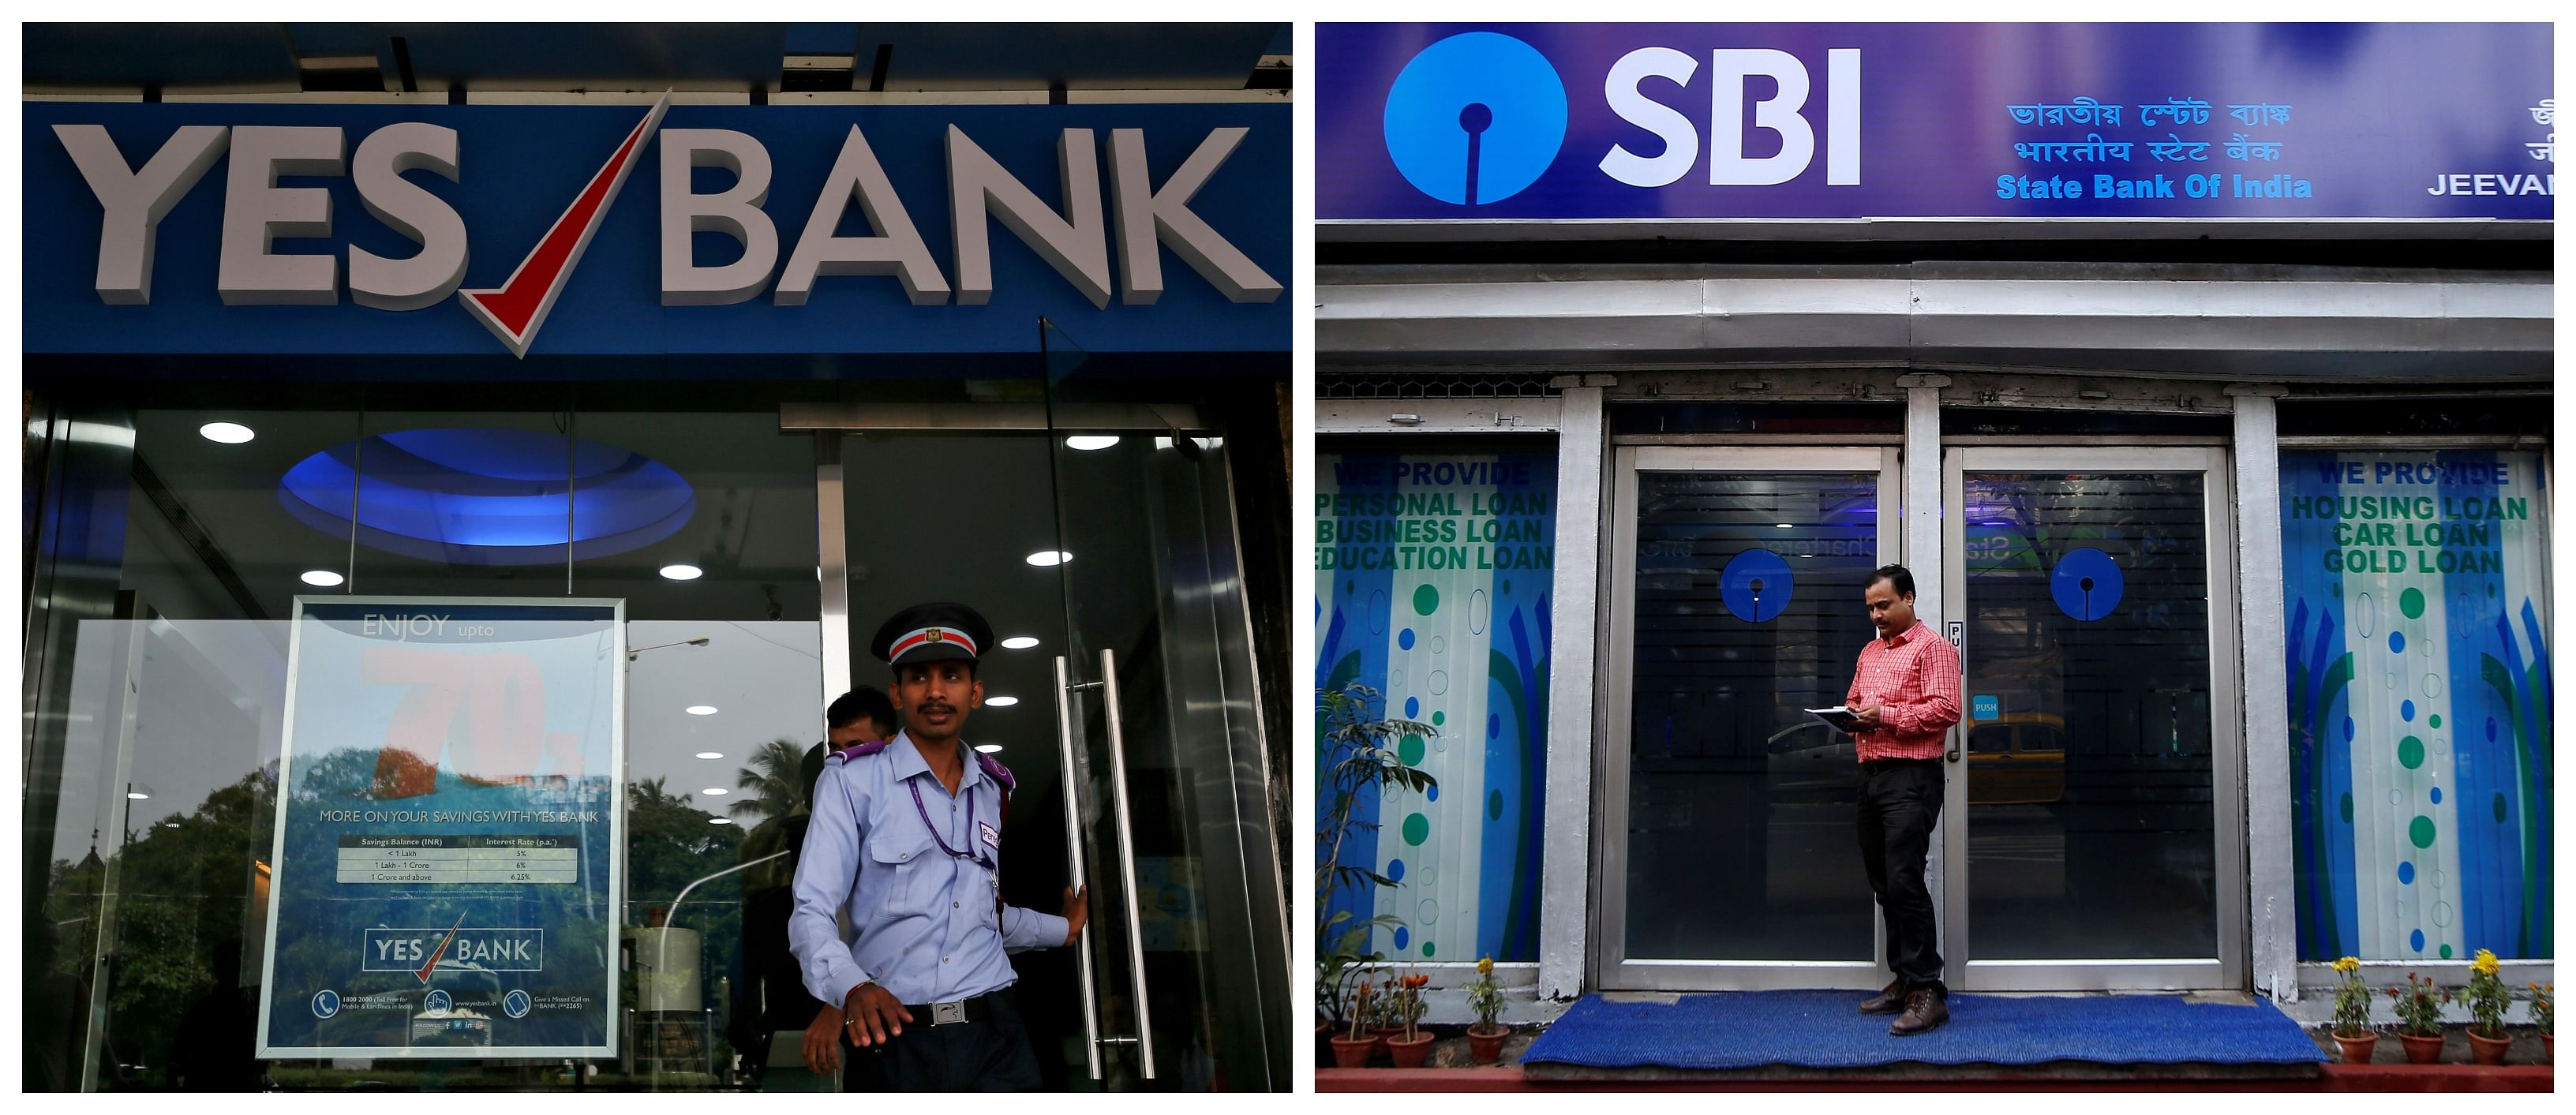 Placing Yes Bank under a 30-day moratorium, the central bank imposed limits on withdrawals to protect depositors and said it would work on a revival plan. (Credit: Agency images)